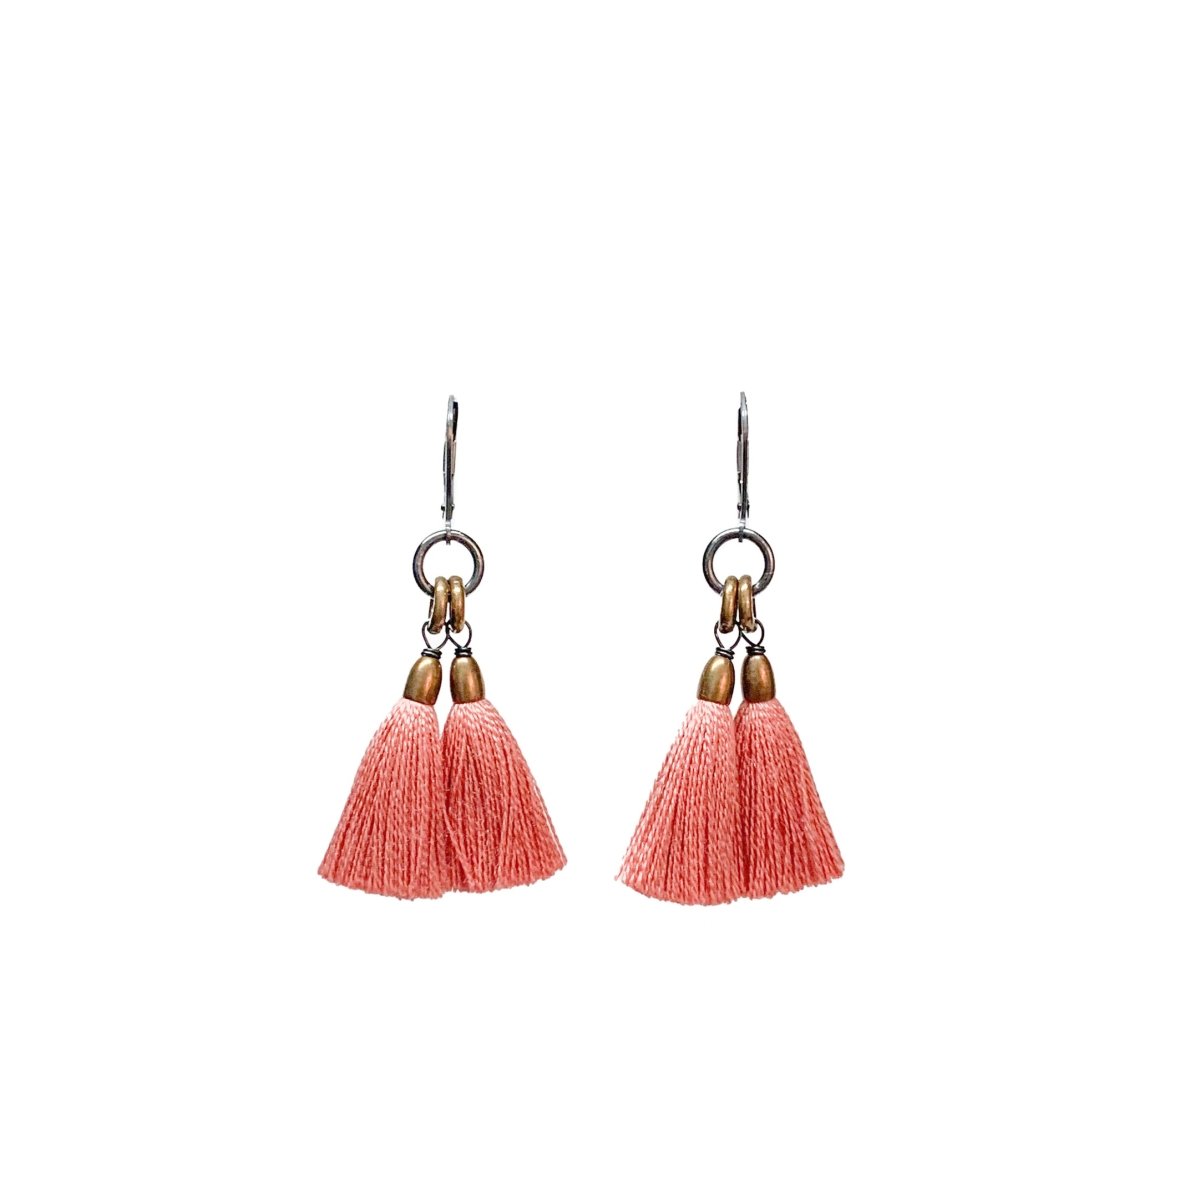 A pair of dangling earrings with blush pink tassels and brass rings topped with a silver leverback. The Fan Earrings in Shell are from Portland designer Emily Bixler of BOET.